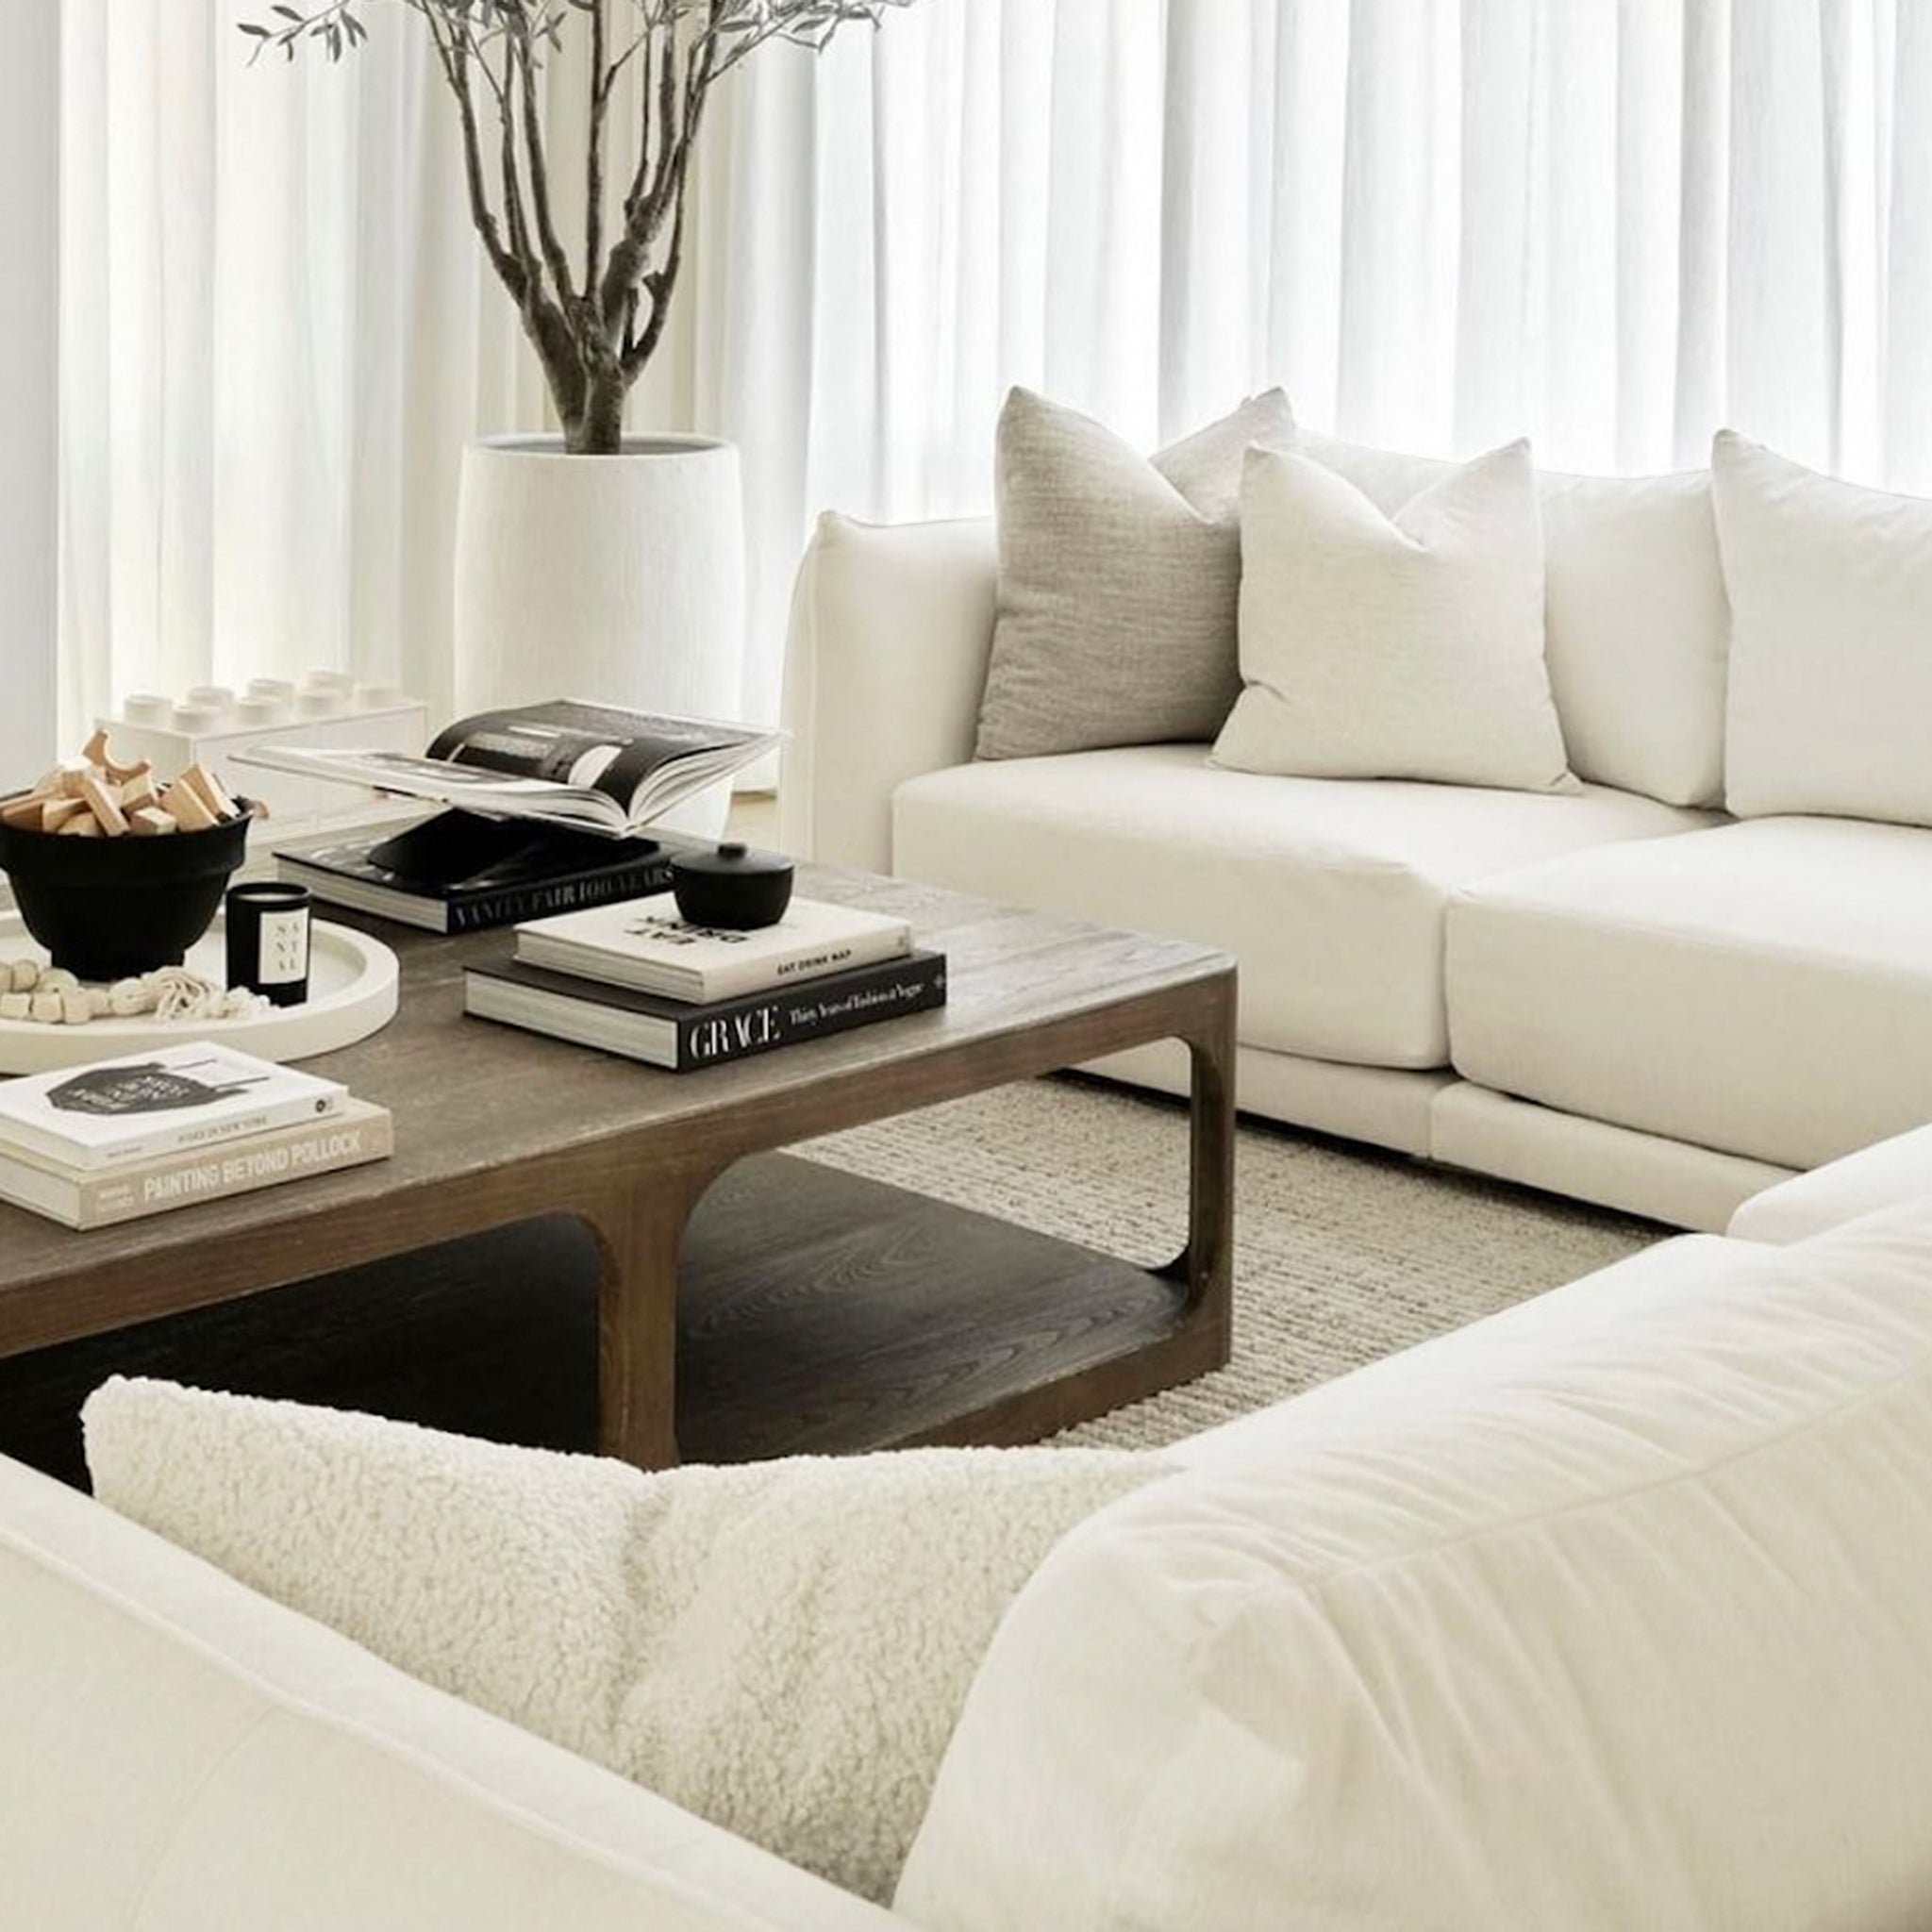 Elegant living room setup featuring a white sectional sofa adorned with cozy pillows, complemented by a wooden coffee table and stylish decor elements.